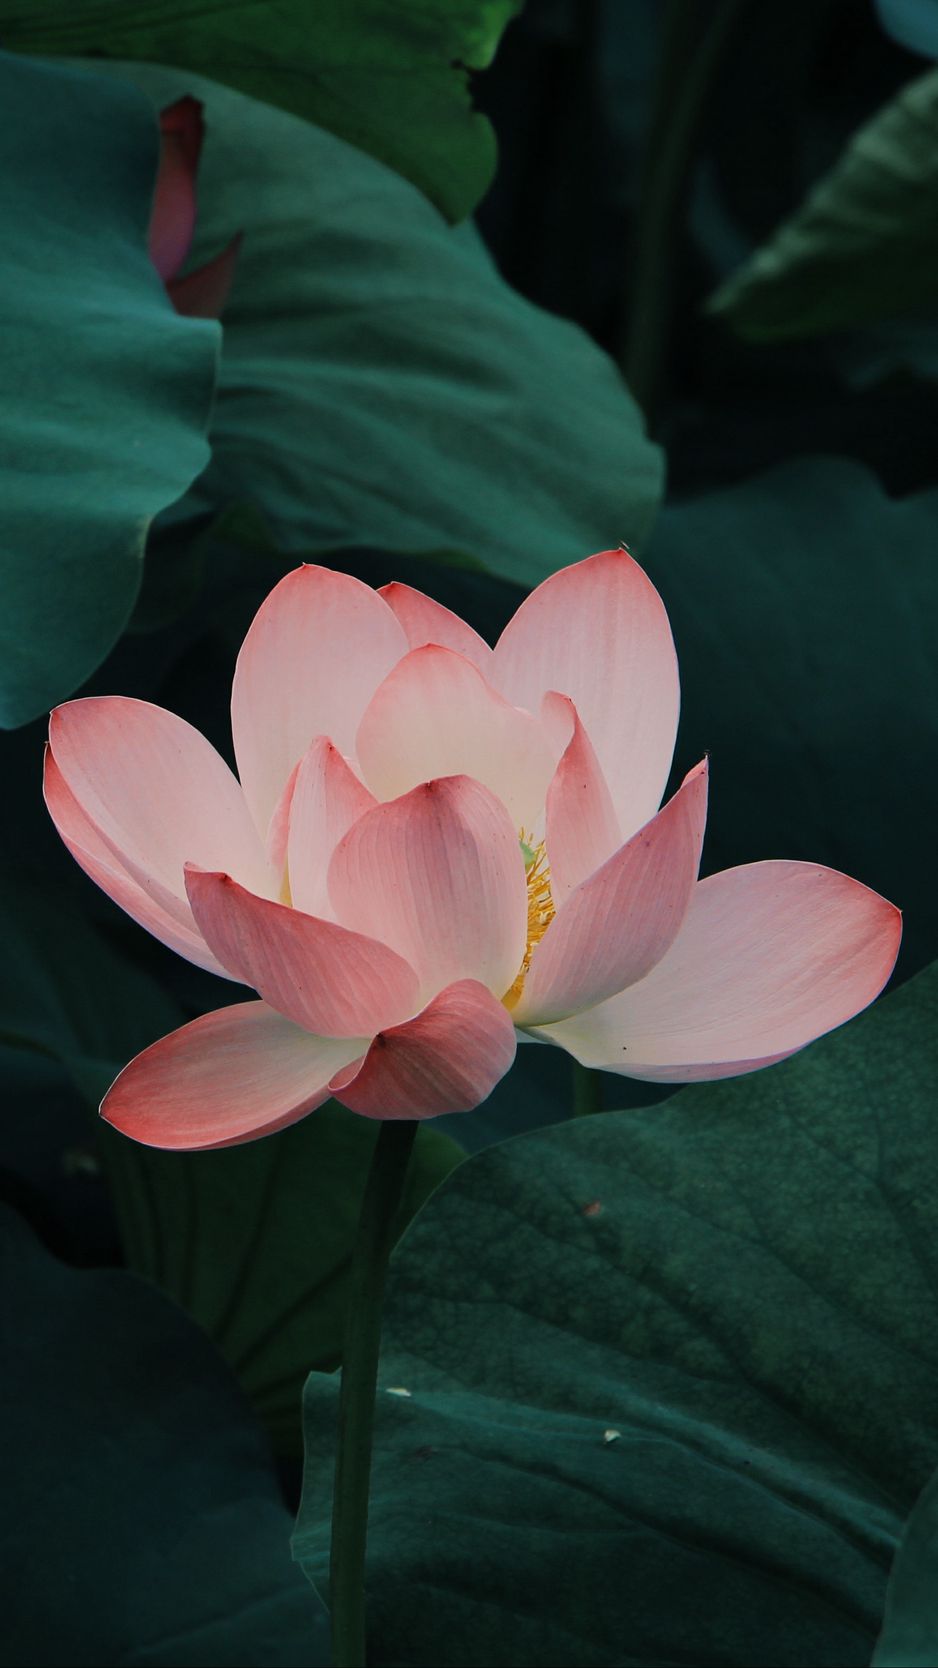 Download wallpaper 938x1668 lotus bloom leaves pink iphone 876s6 for  parallax hd background